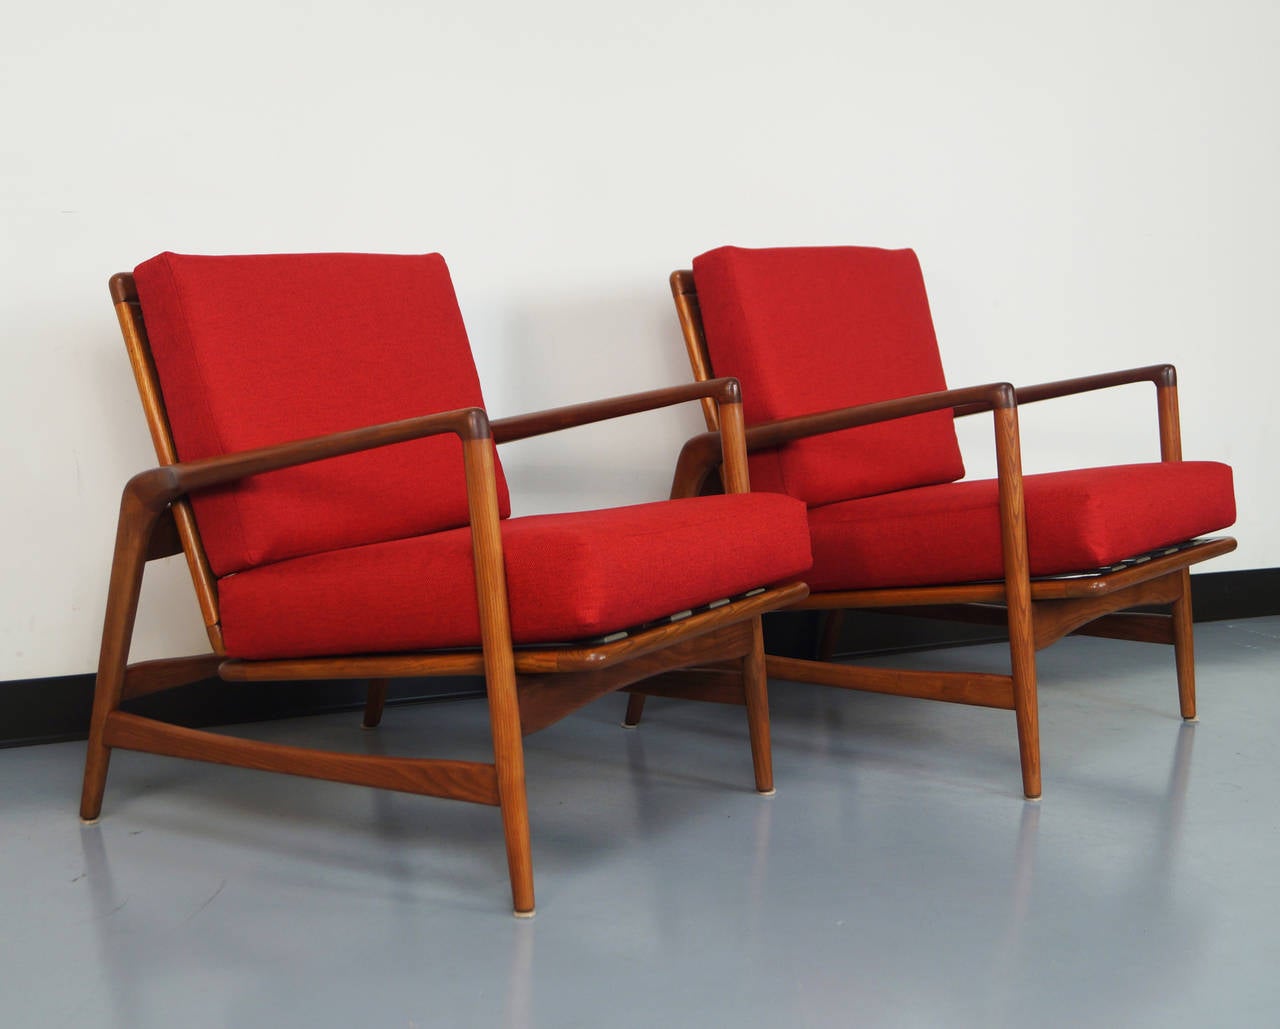 Pair of vintage Ib Kofod-Larsen reclining lounge chairs on sculpted oak frame. Chair have four reclining positions. It can either sit upright or can lock into its reclining positions.